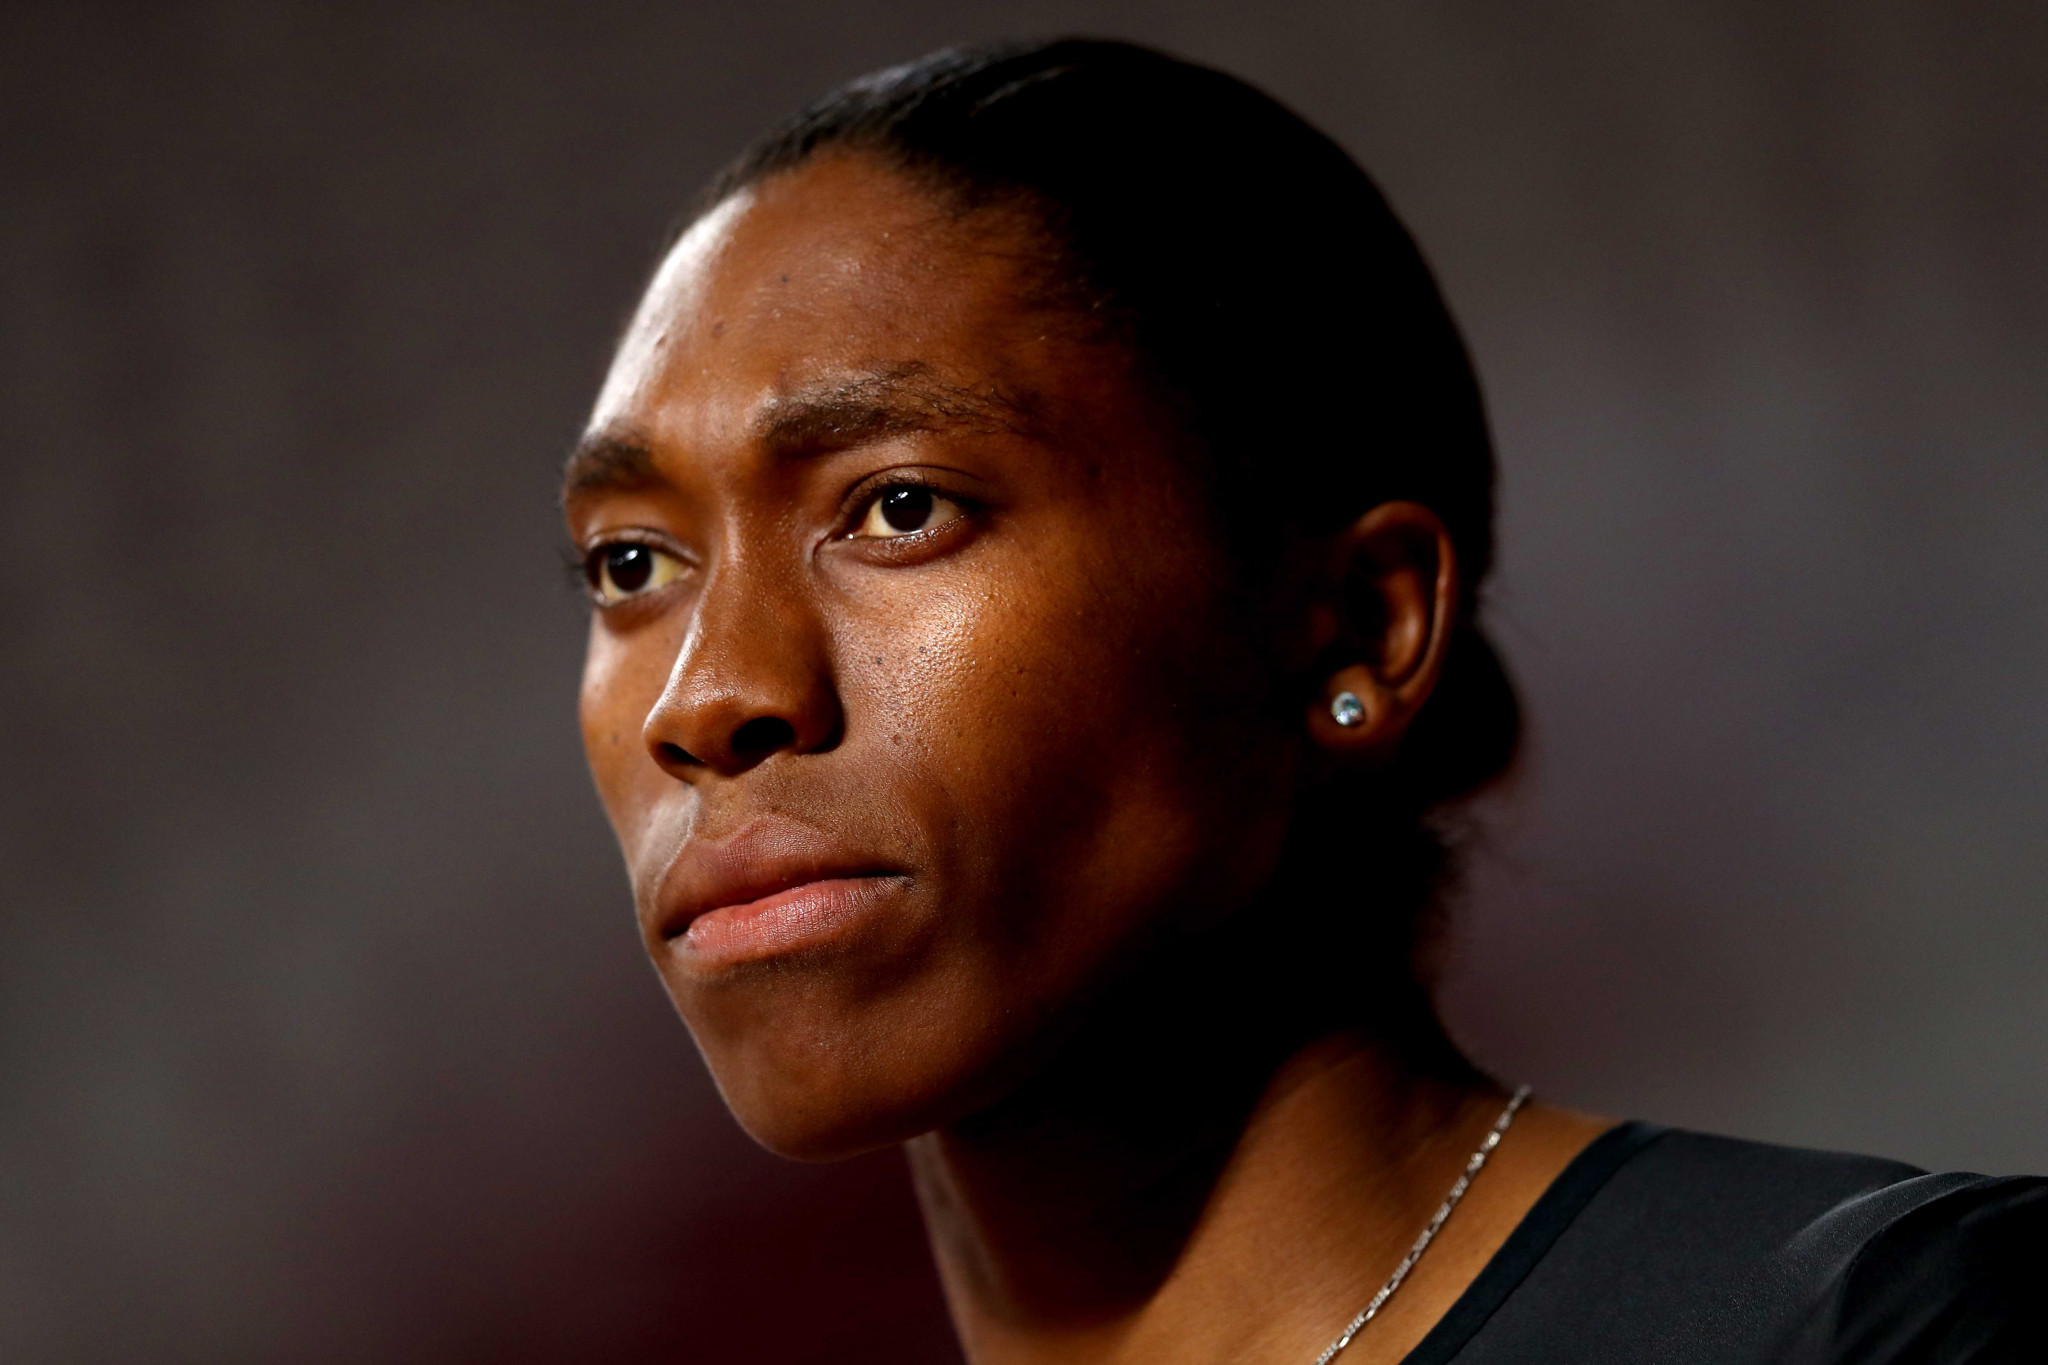 Athletics South Africa will lodge an appeal against CAS's decision to rule in favour of the IAAF in its landmark legal case against Caster Semenya ©Getty Images